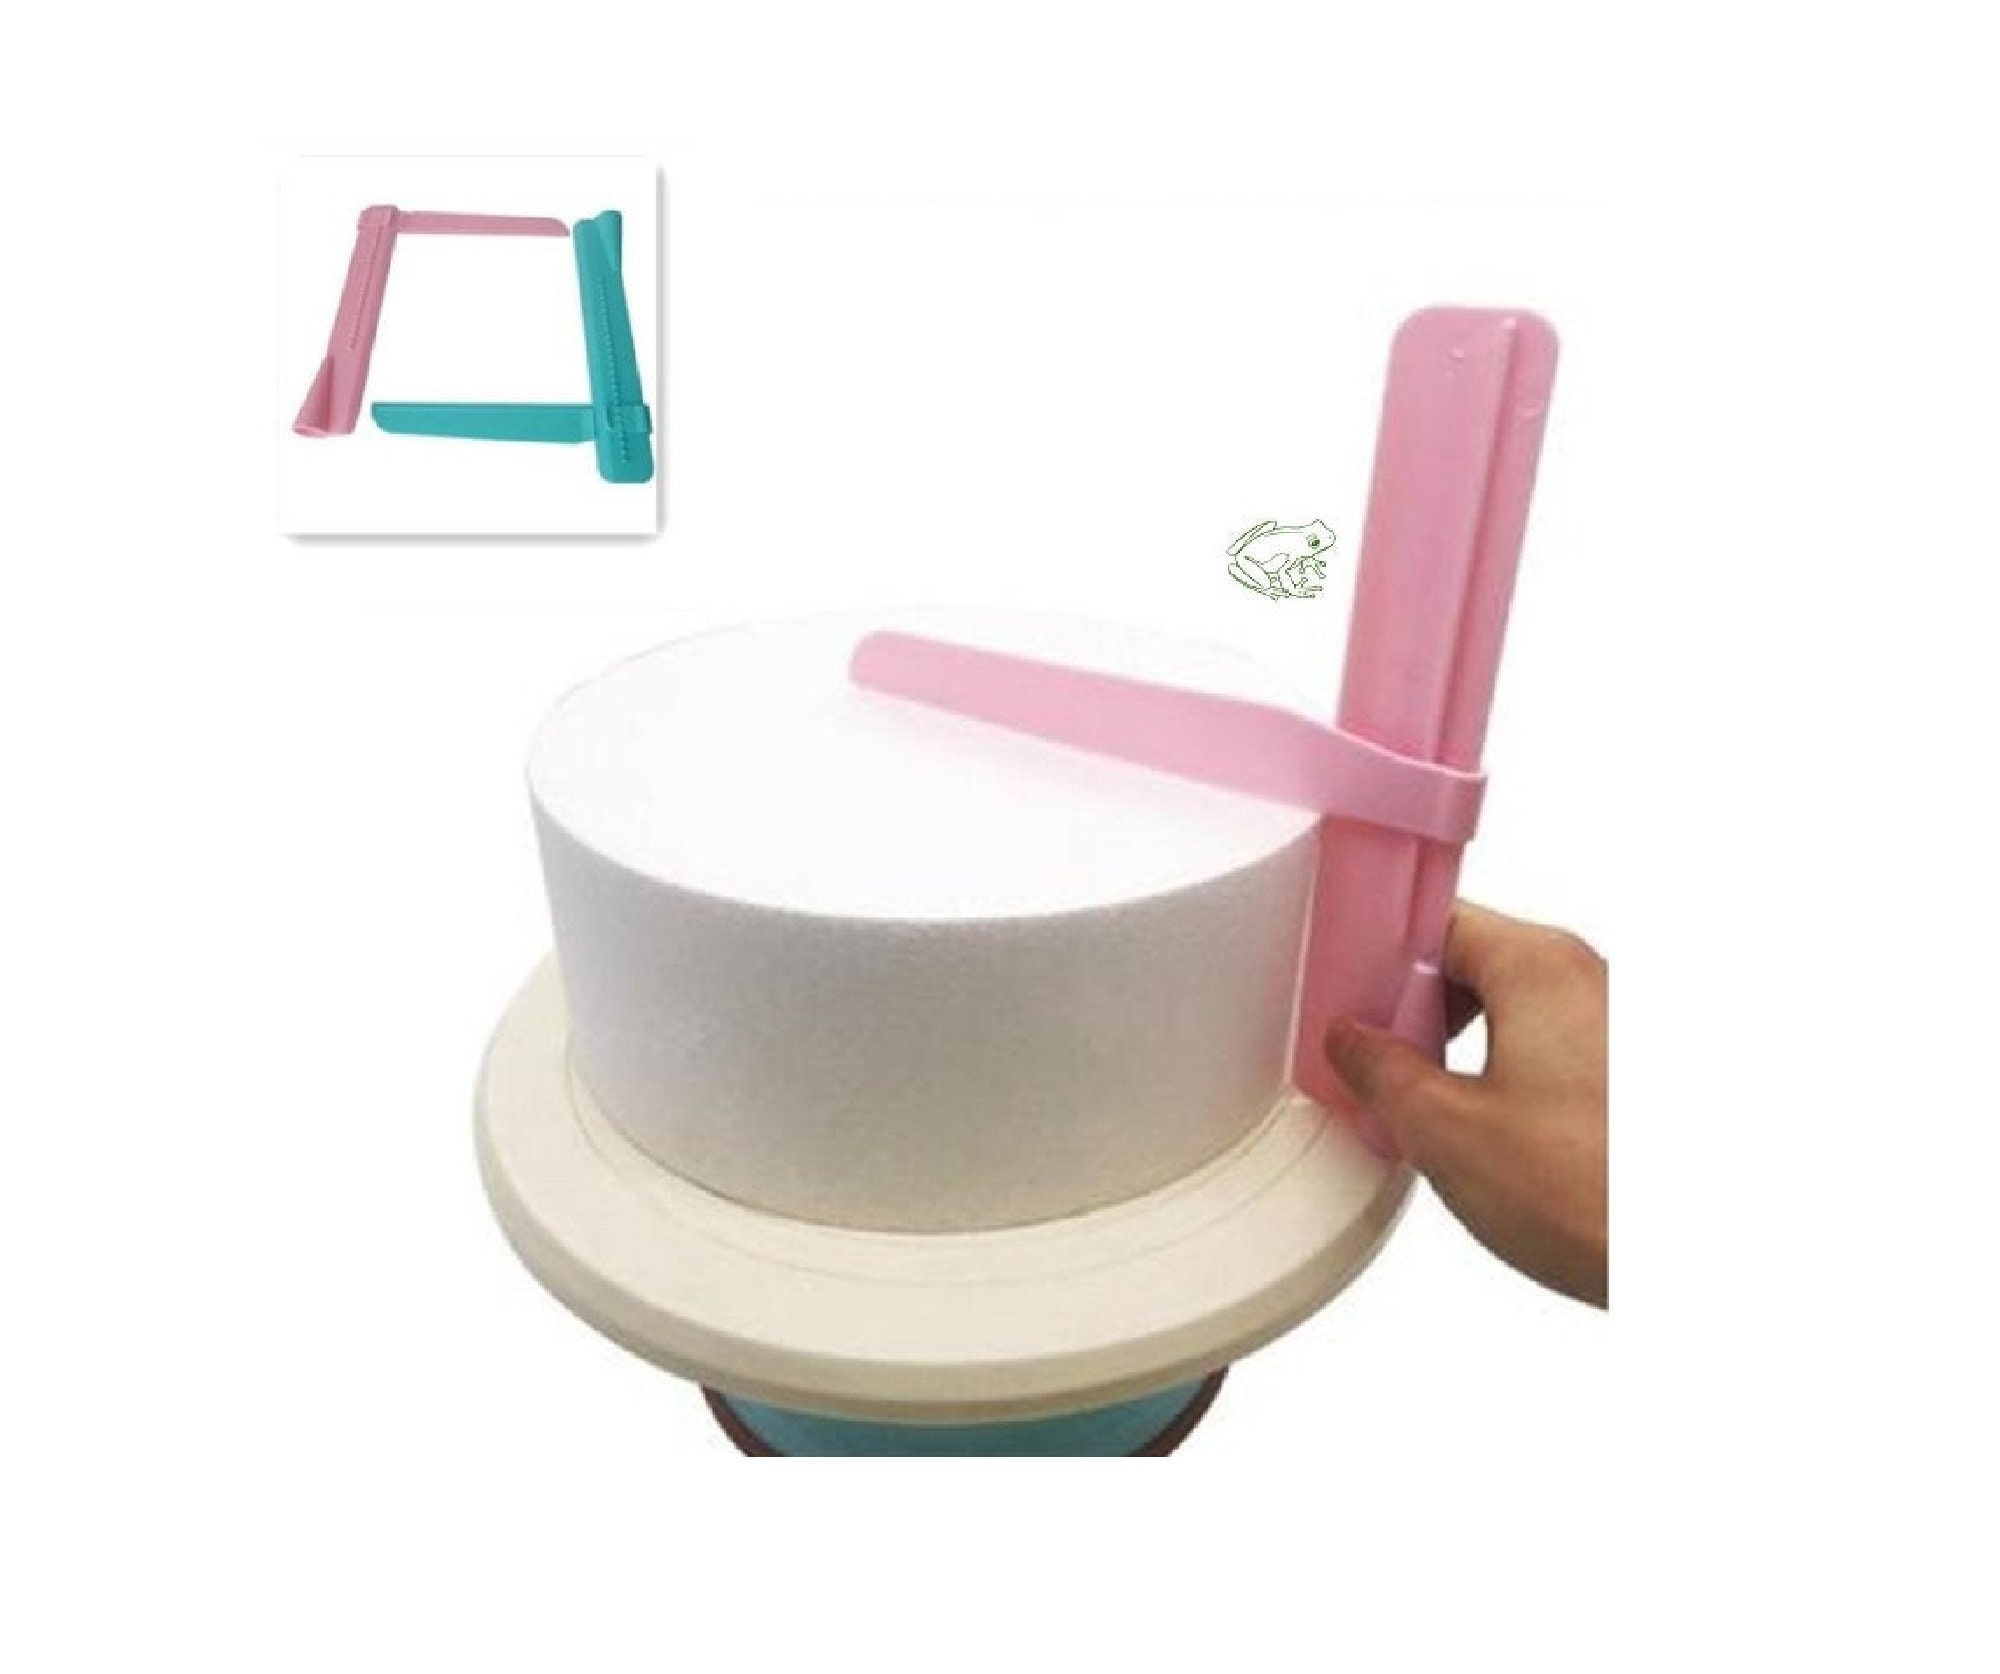 Dropship Cake Icing Smoother Cake Scraper Tool Cake Fondant Polisher  Plastic Cake Decorating Tool Baking Tool to Sell Online at a Lower Price